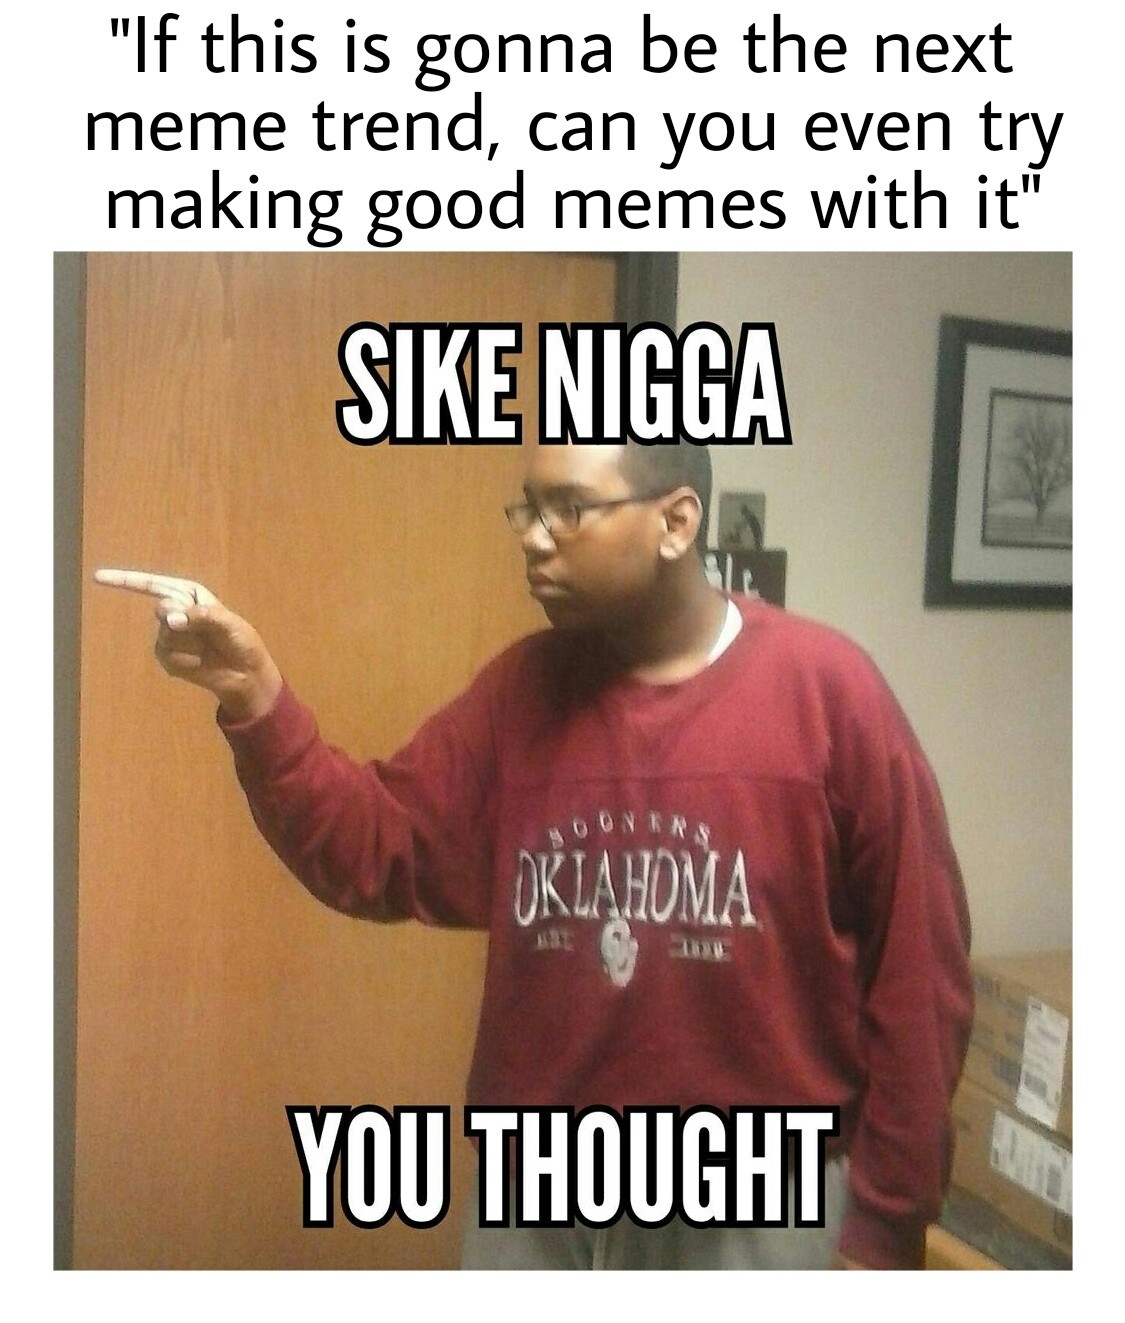 sike you thought meme.